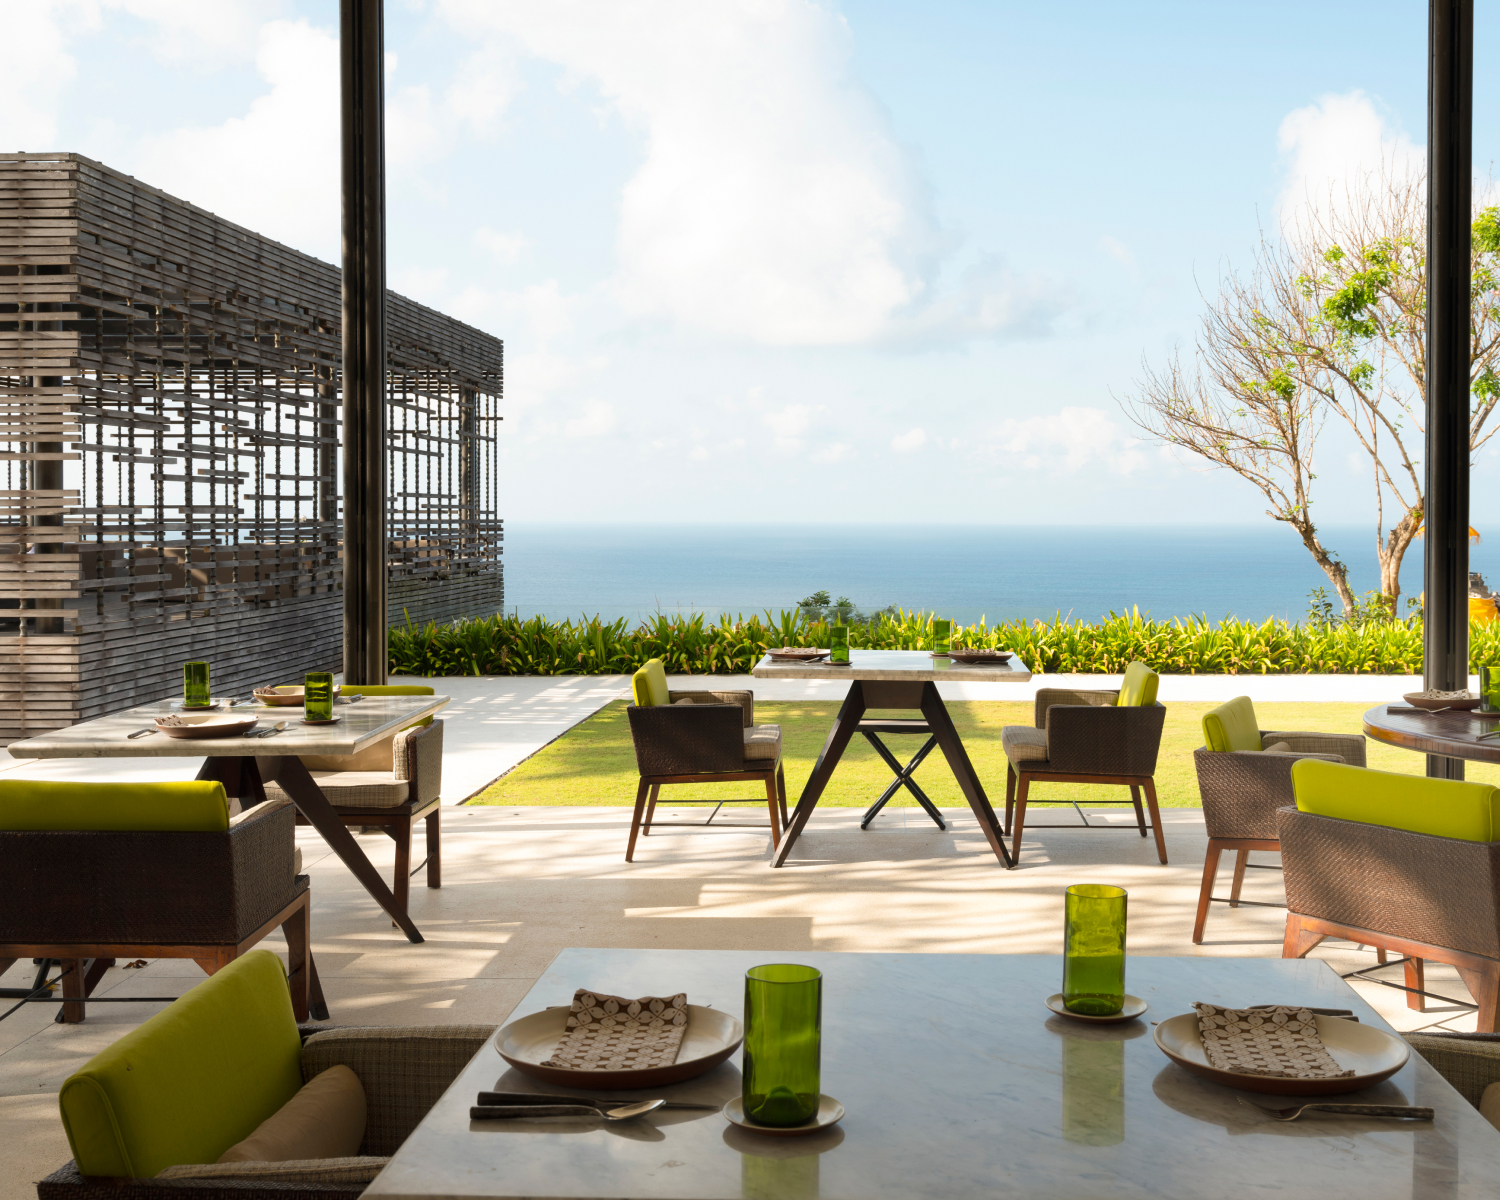 Warung outdoor dining under a covered patio overlooking the ocean